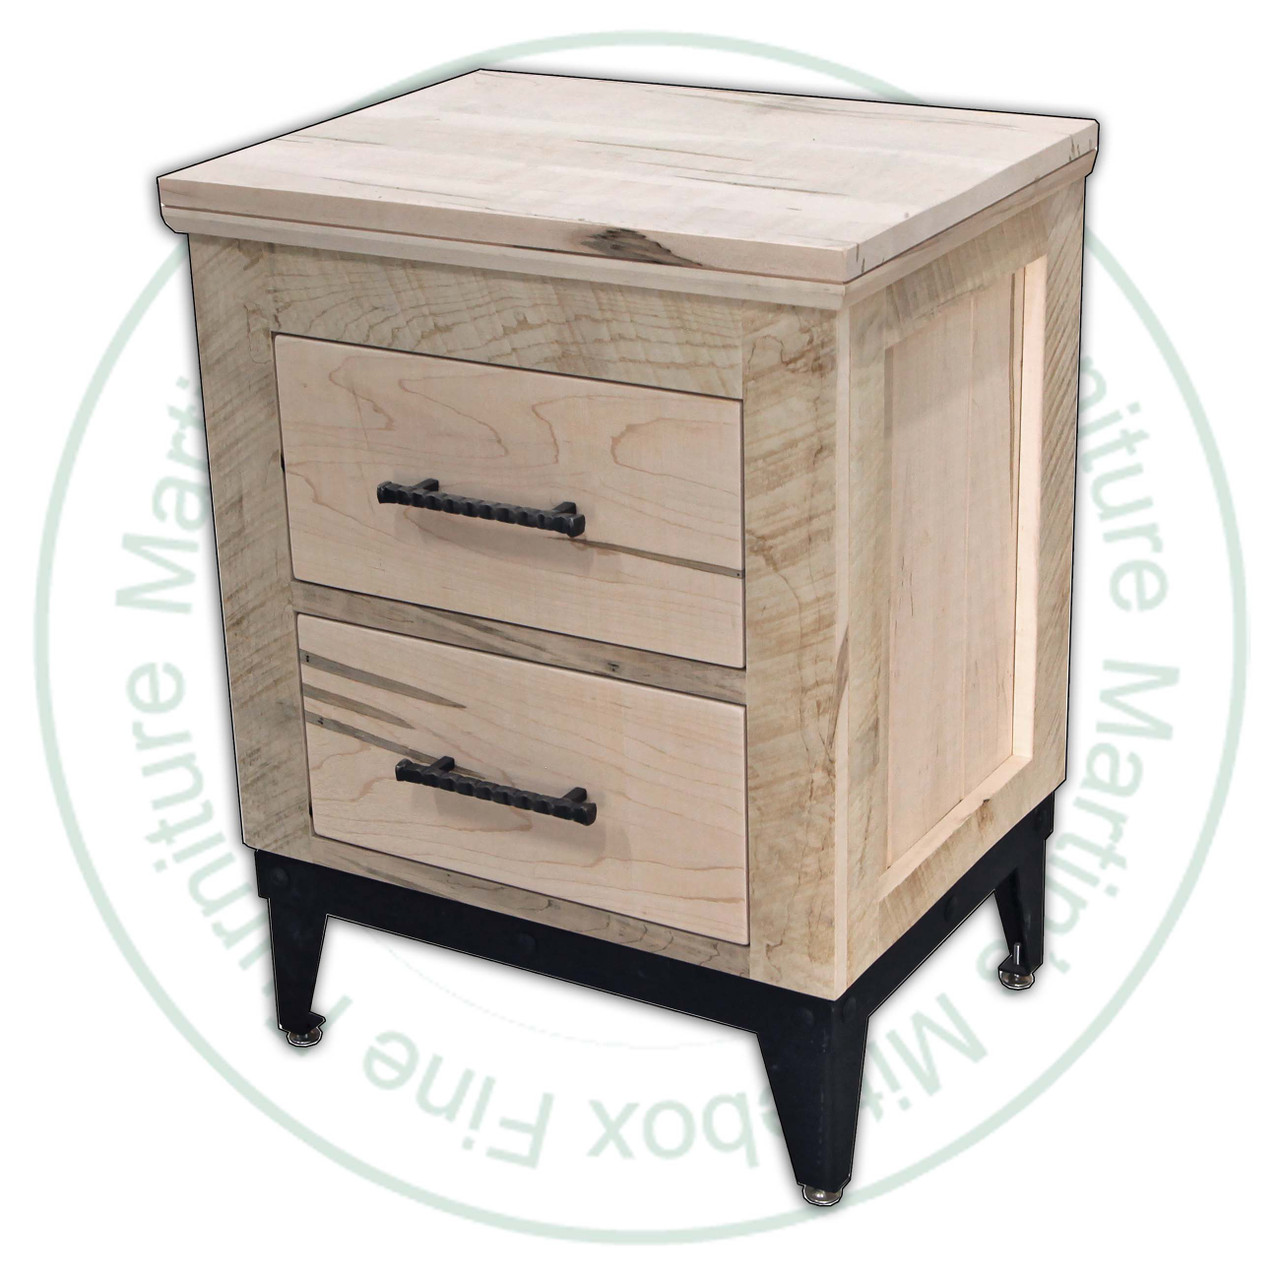 Wormy Maple Lexington Night Stand 24''W x 32''H x 19''D With 2 Drawers